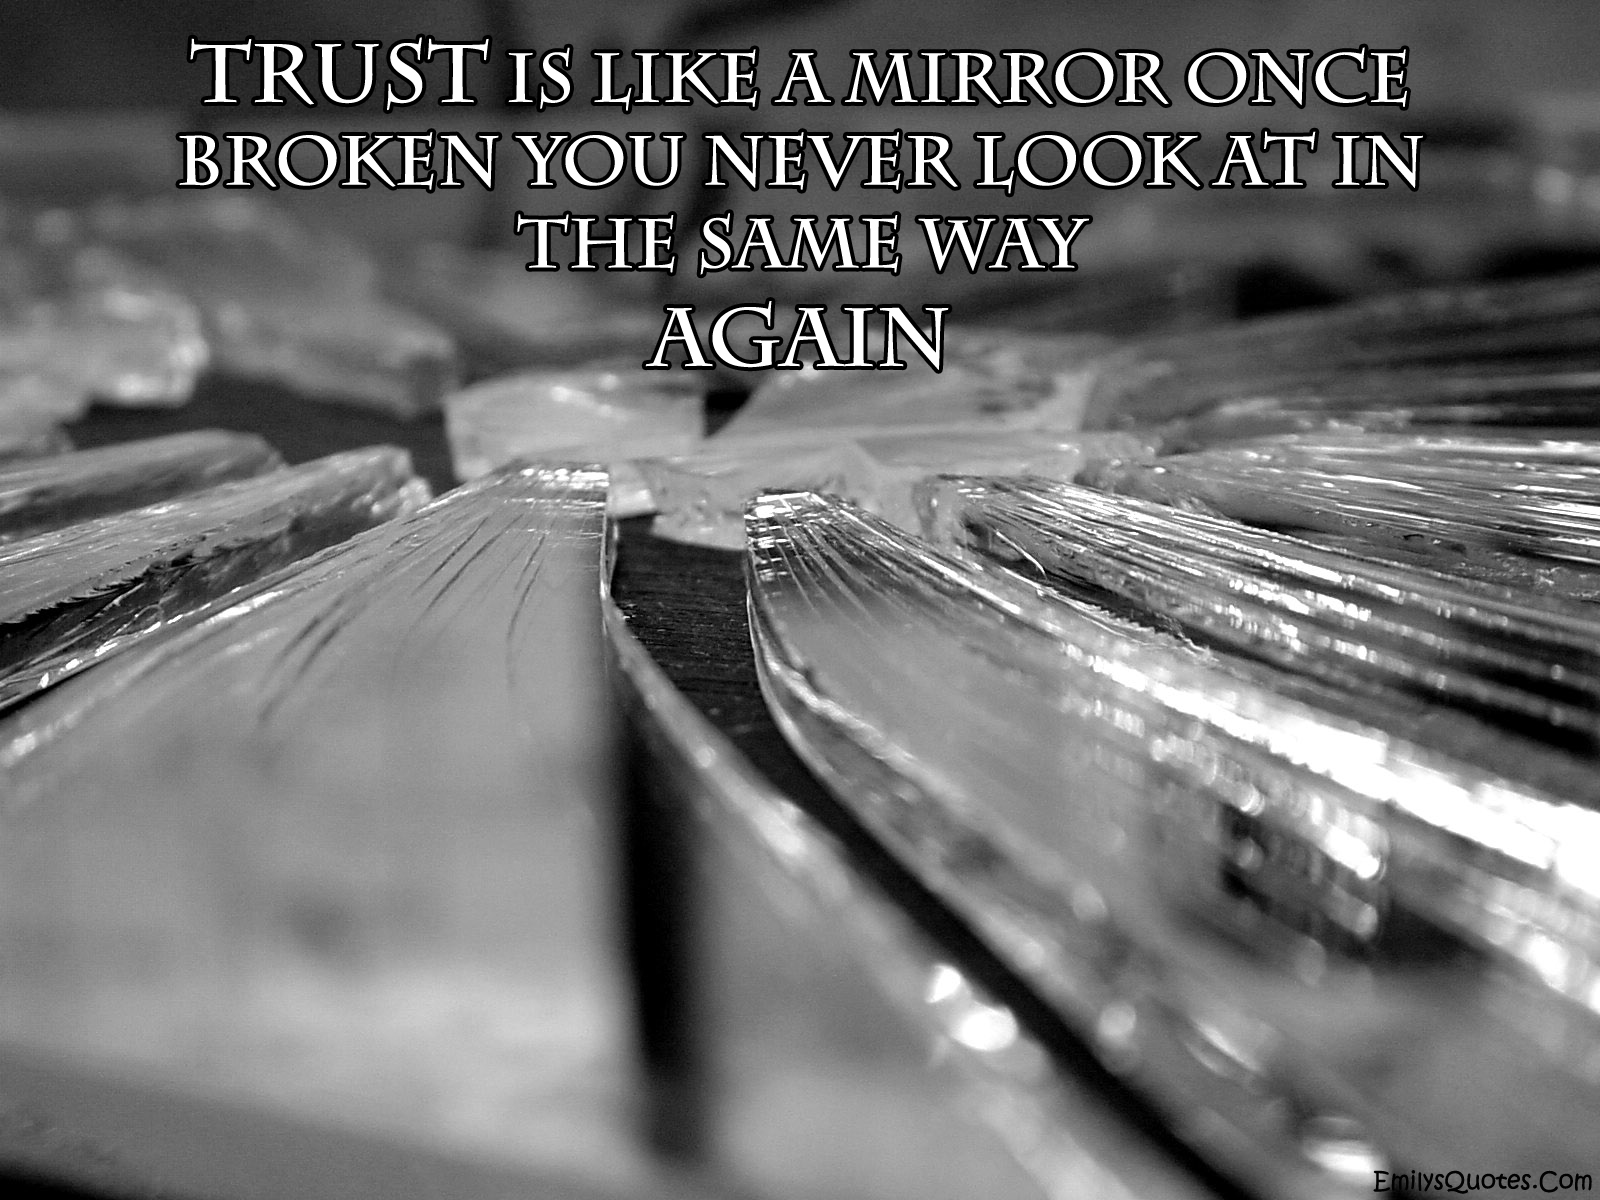 Trust is like a mirror once broken you never look at in the same way again